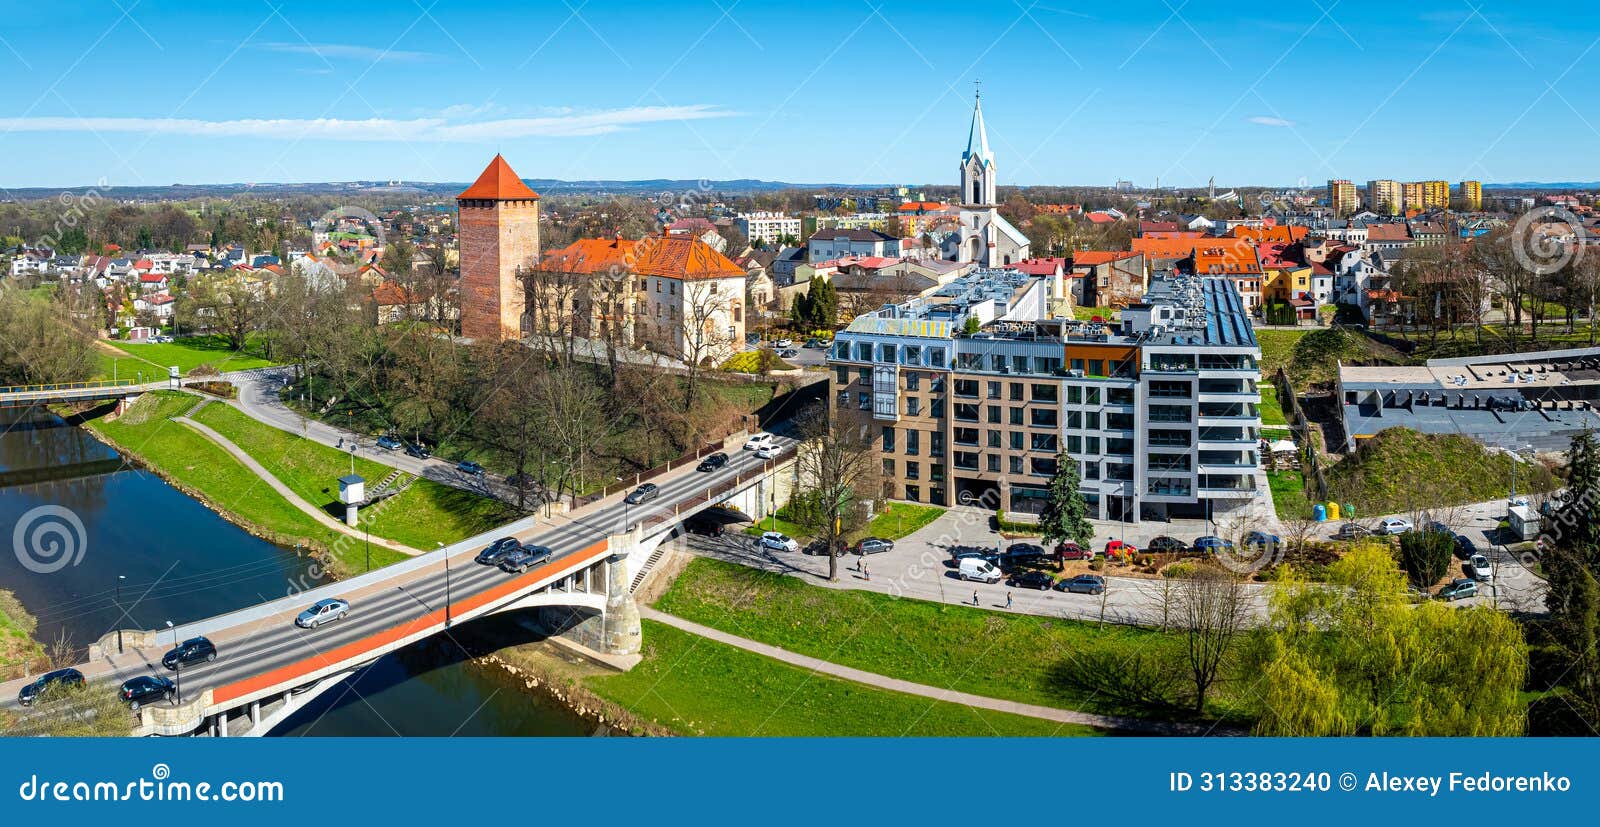 view of city of oswiecim in poland, where nazi auschwitz concentration camp is located